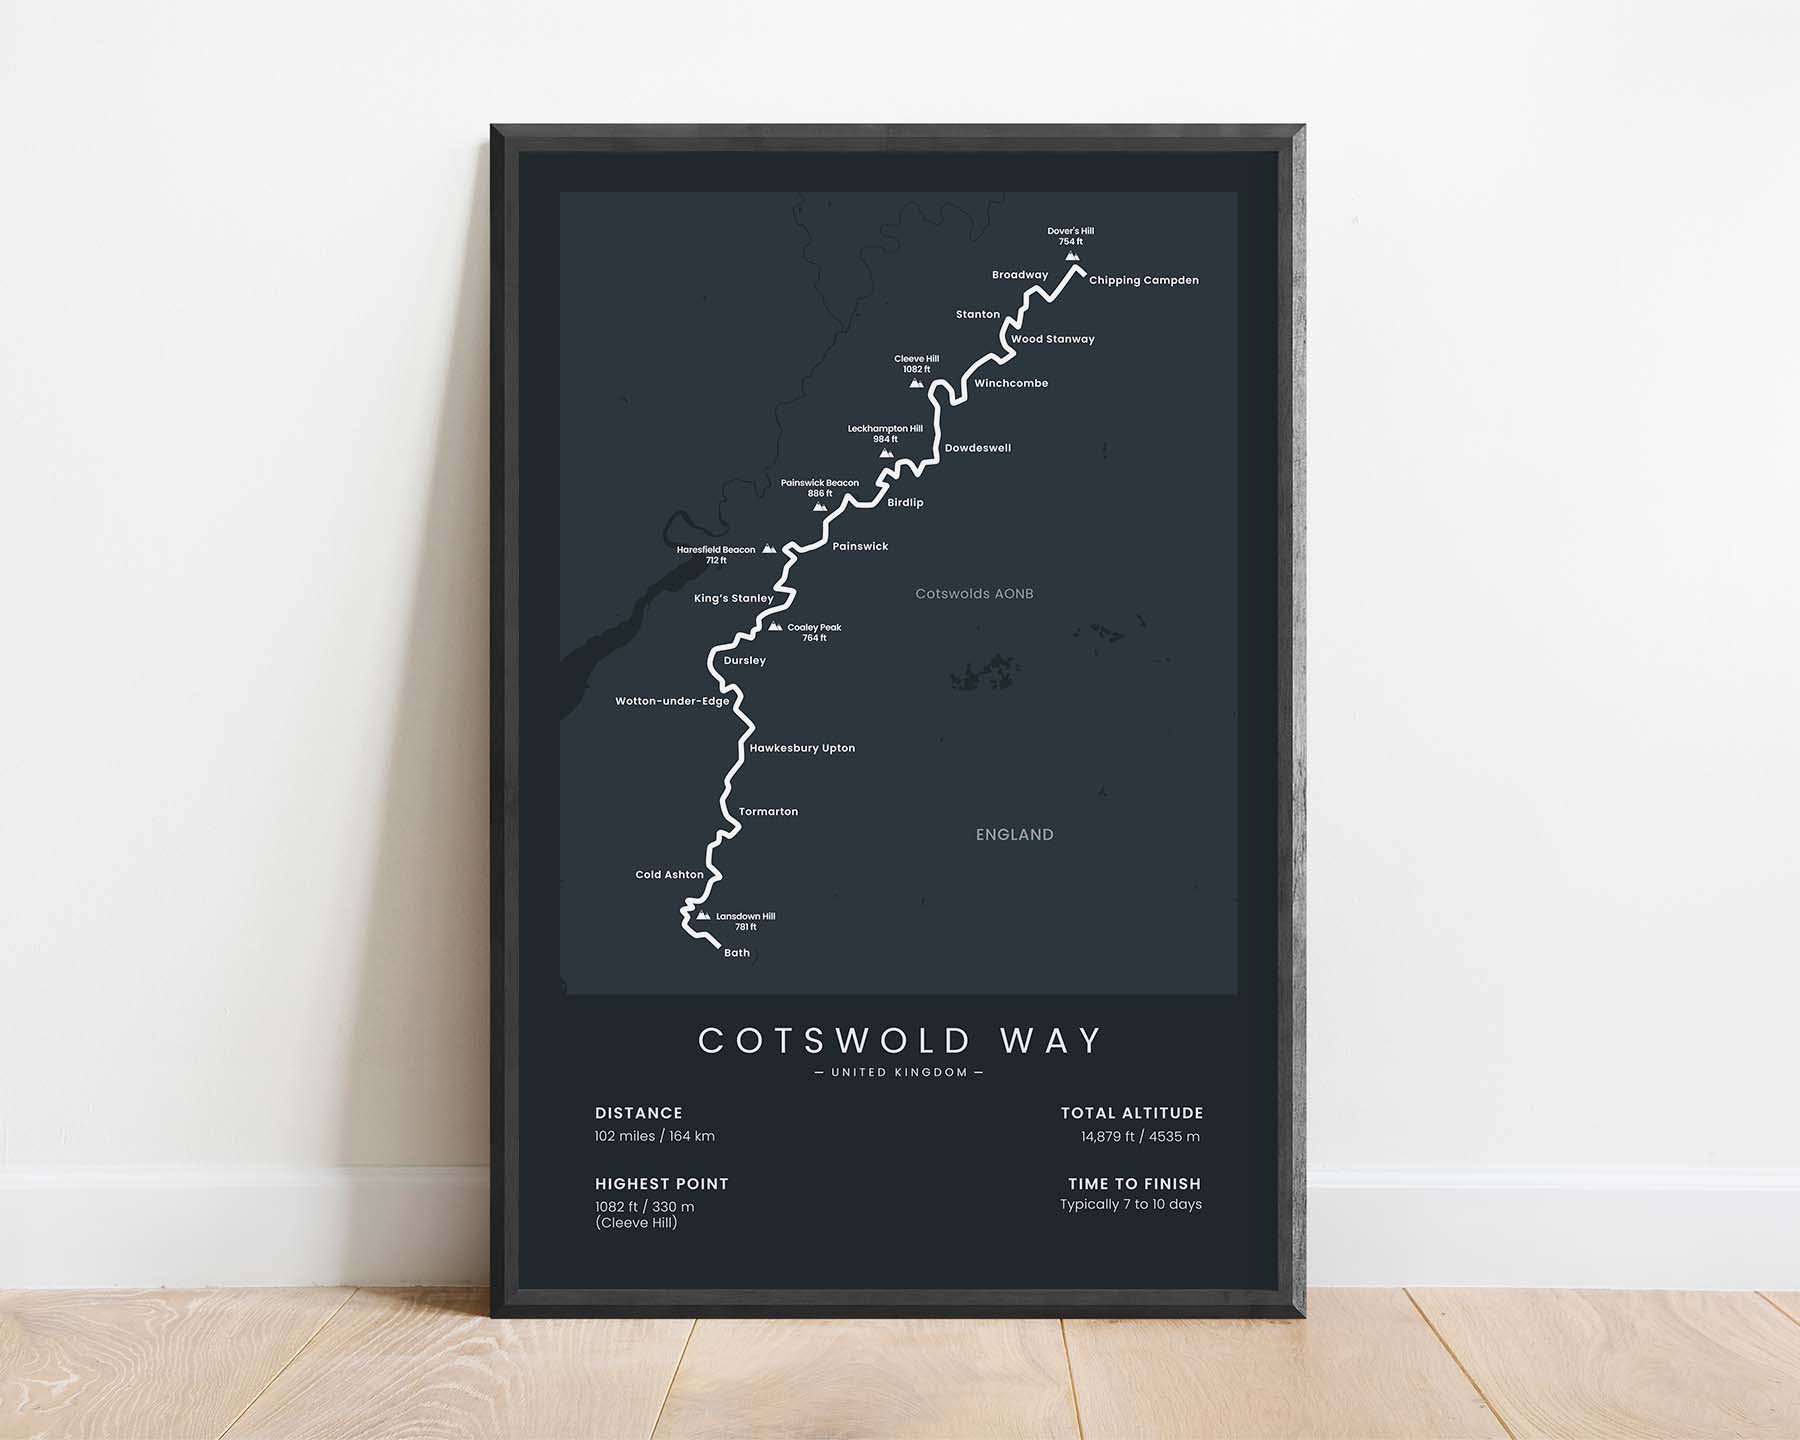 Cotswold Way National Trail (Cotswolds AONB, United Kingdom, Chipping Campden to Bath, England) Trail Wall Art with Black Background